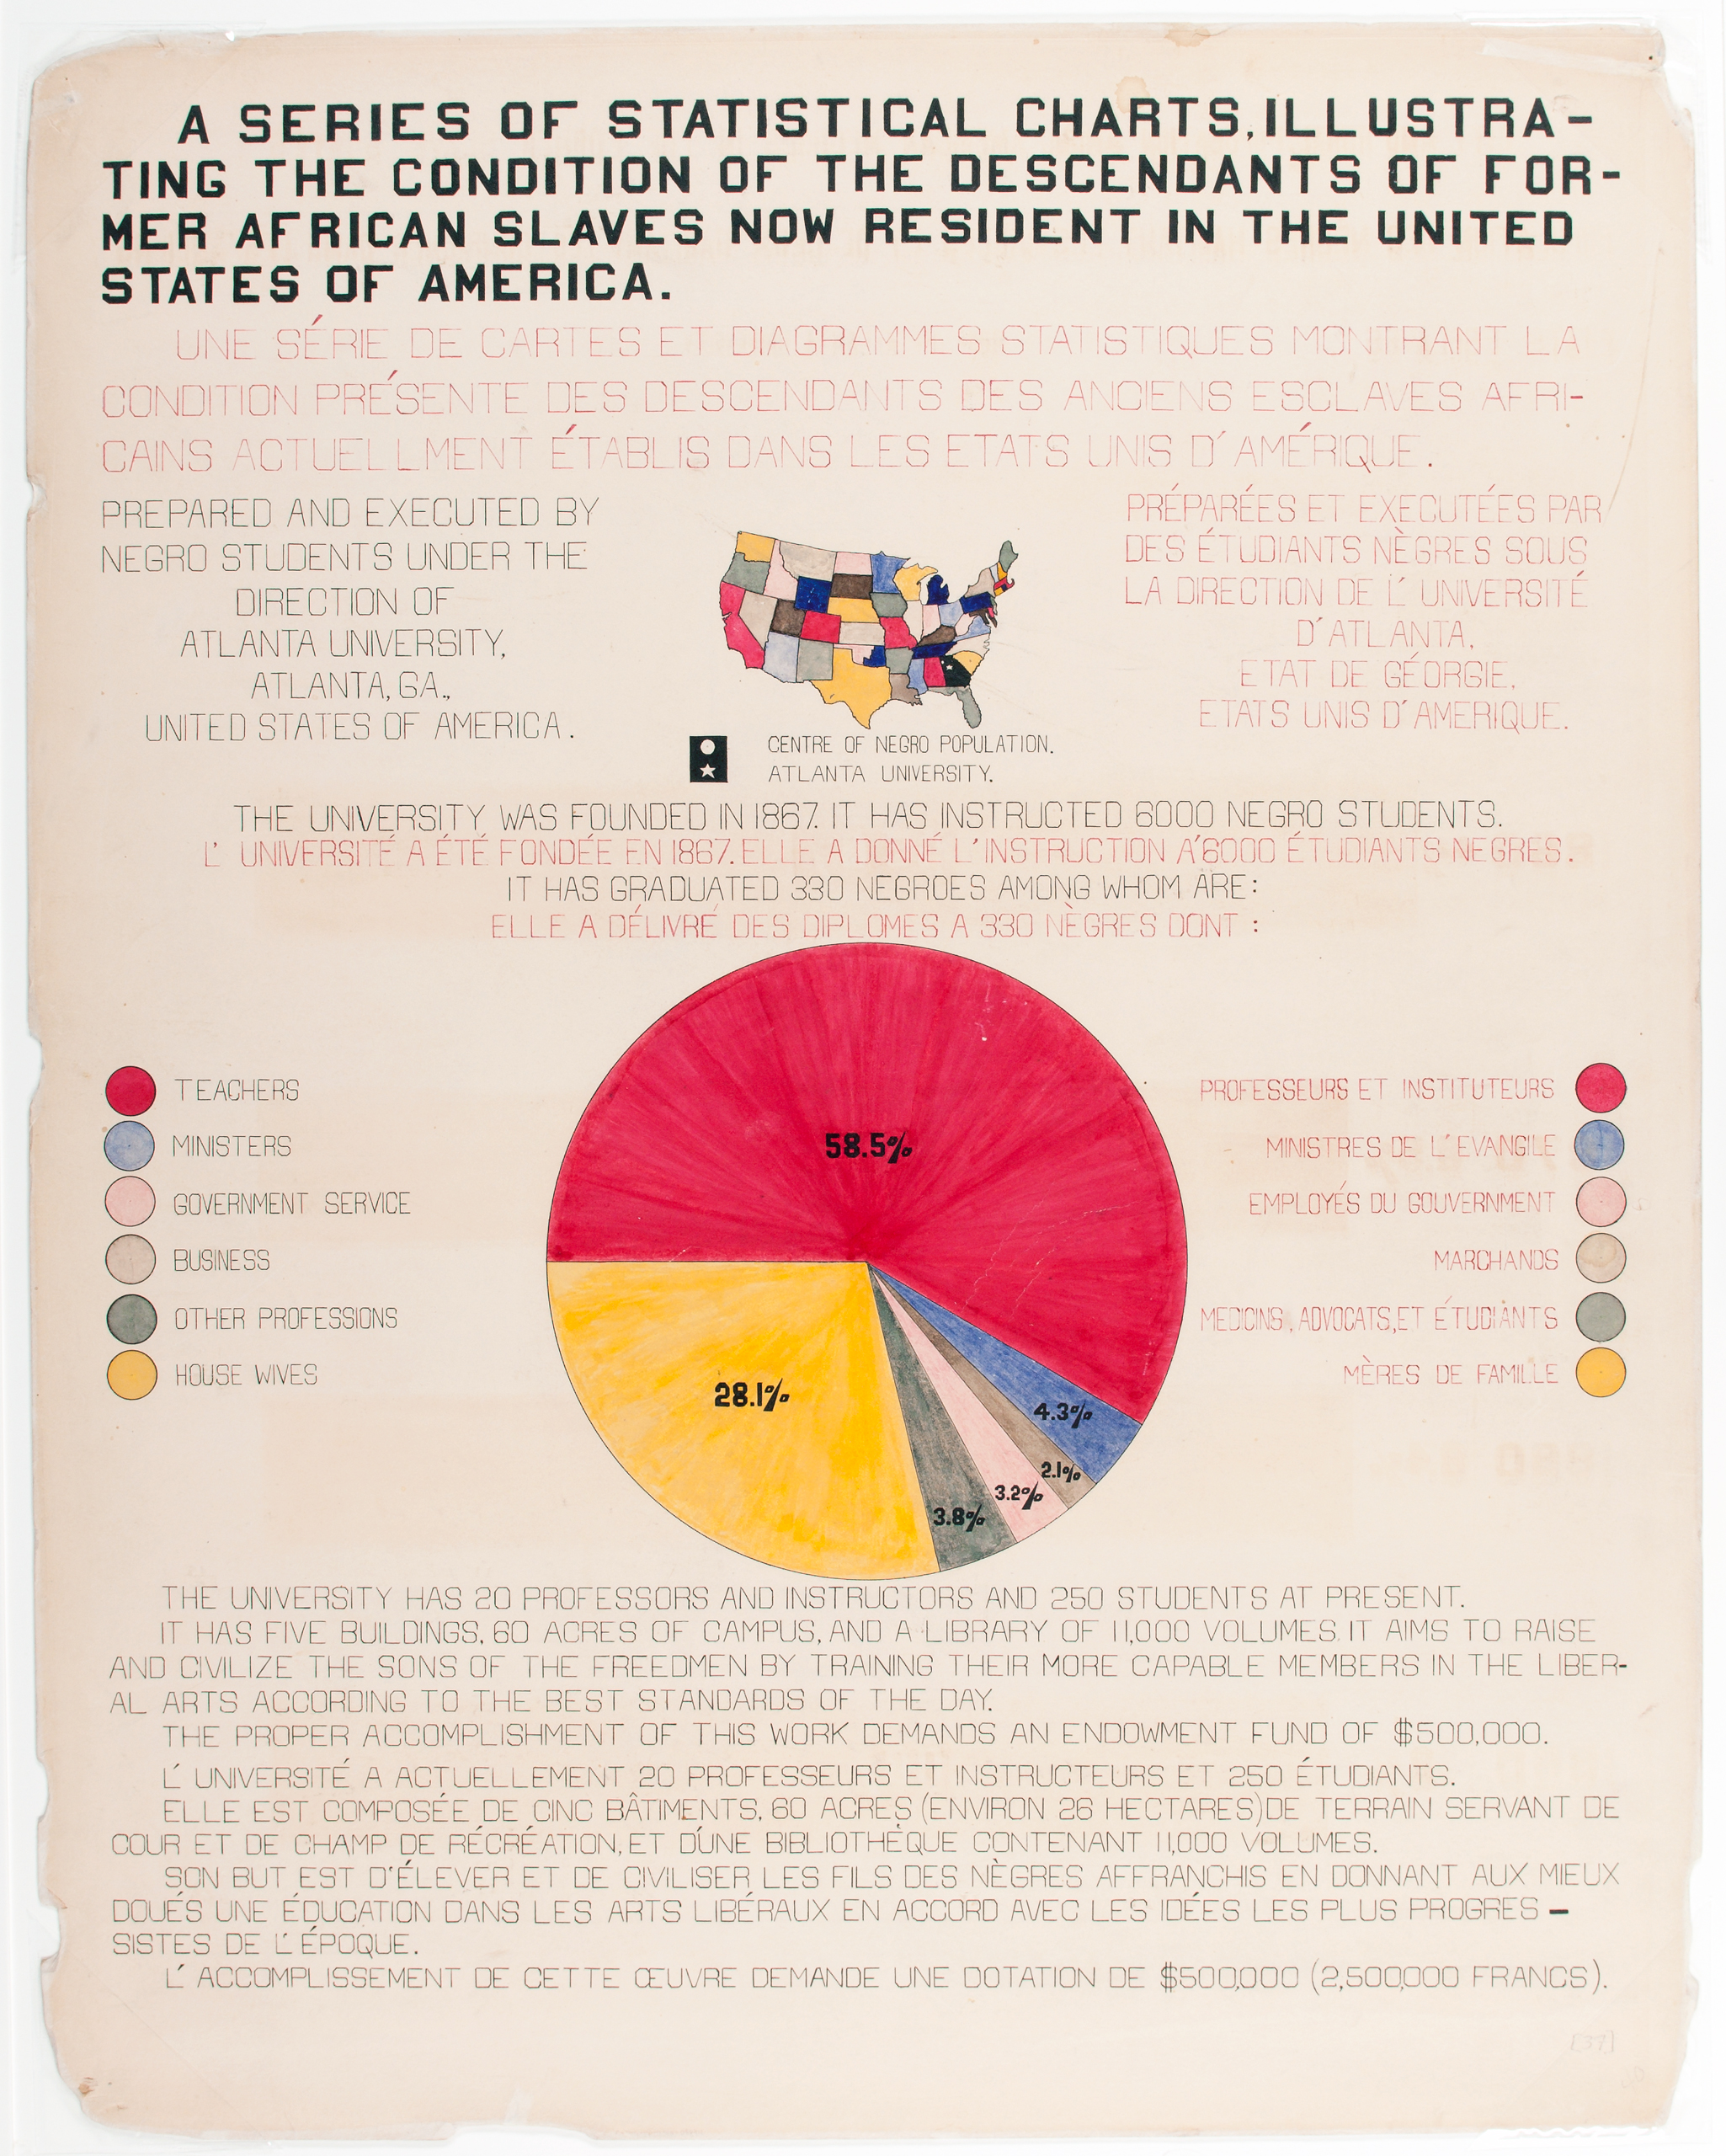 Chart prepared by Atlanta University students for the Negro Exhibit of the American Section at the Paris Exposition Universelle in 1900 to show the economic and social progress of African Americans since emancipation.